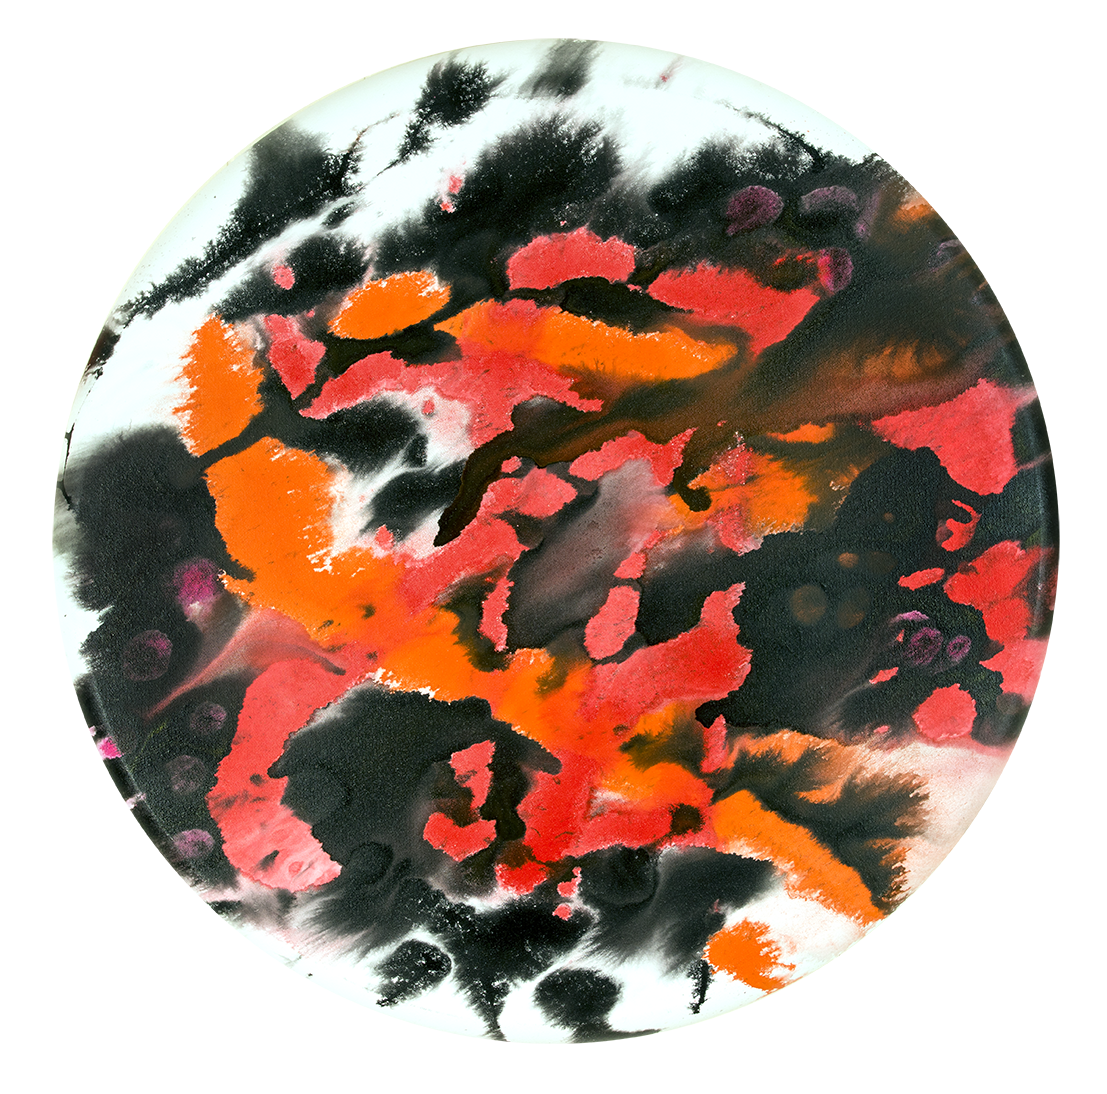 © 2020 Alicia R Peterson, *A New Story*. Acrylic on 30-inch diameter convex canvas. Photographer: Peter Scheer